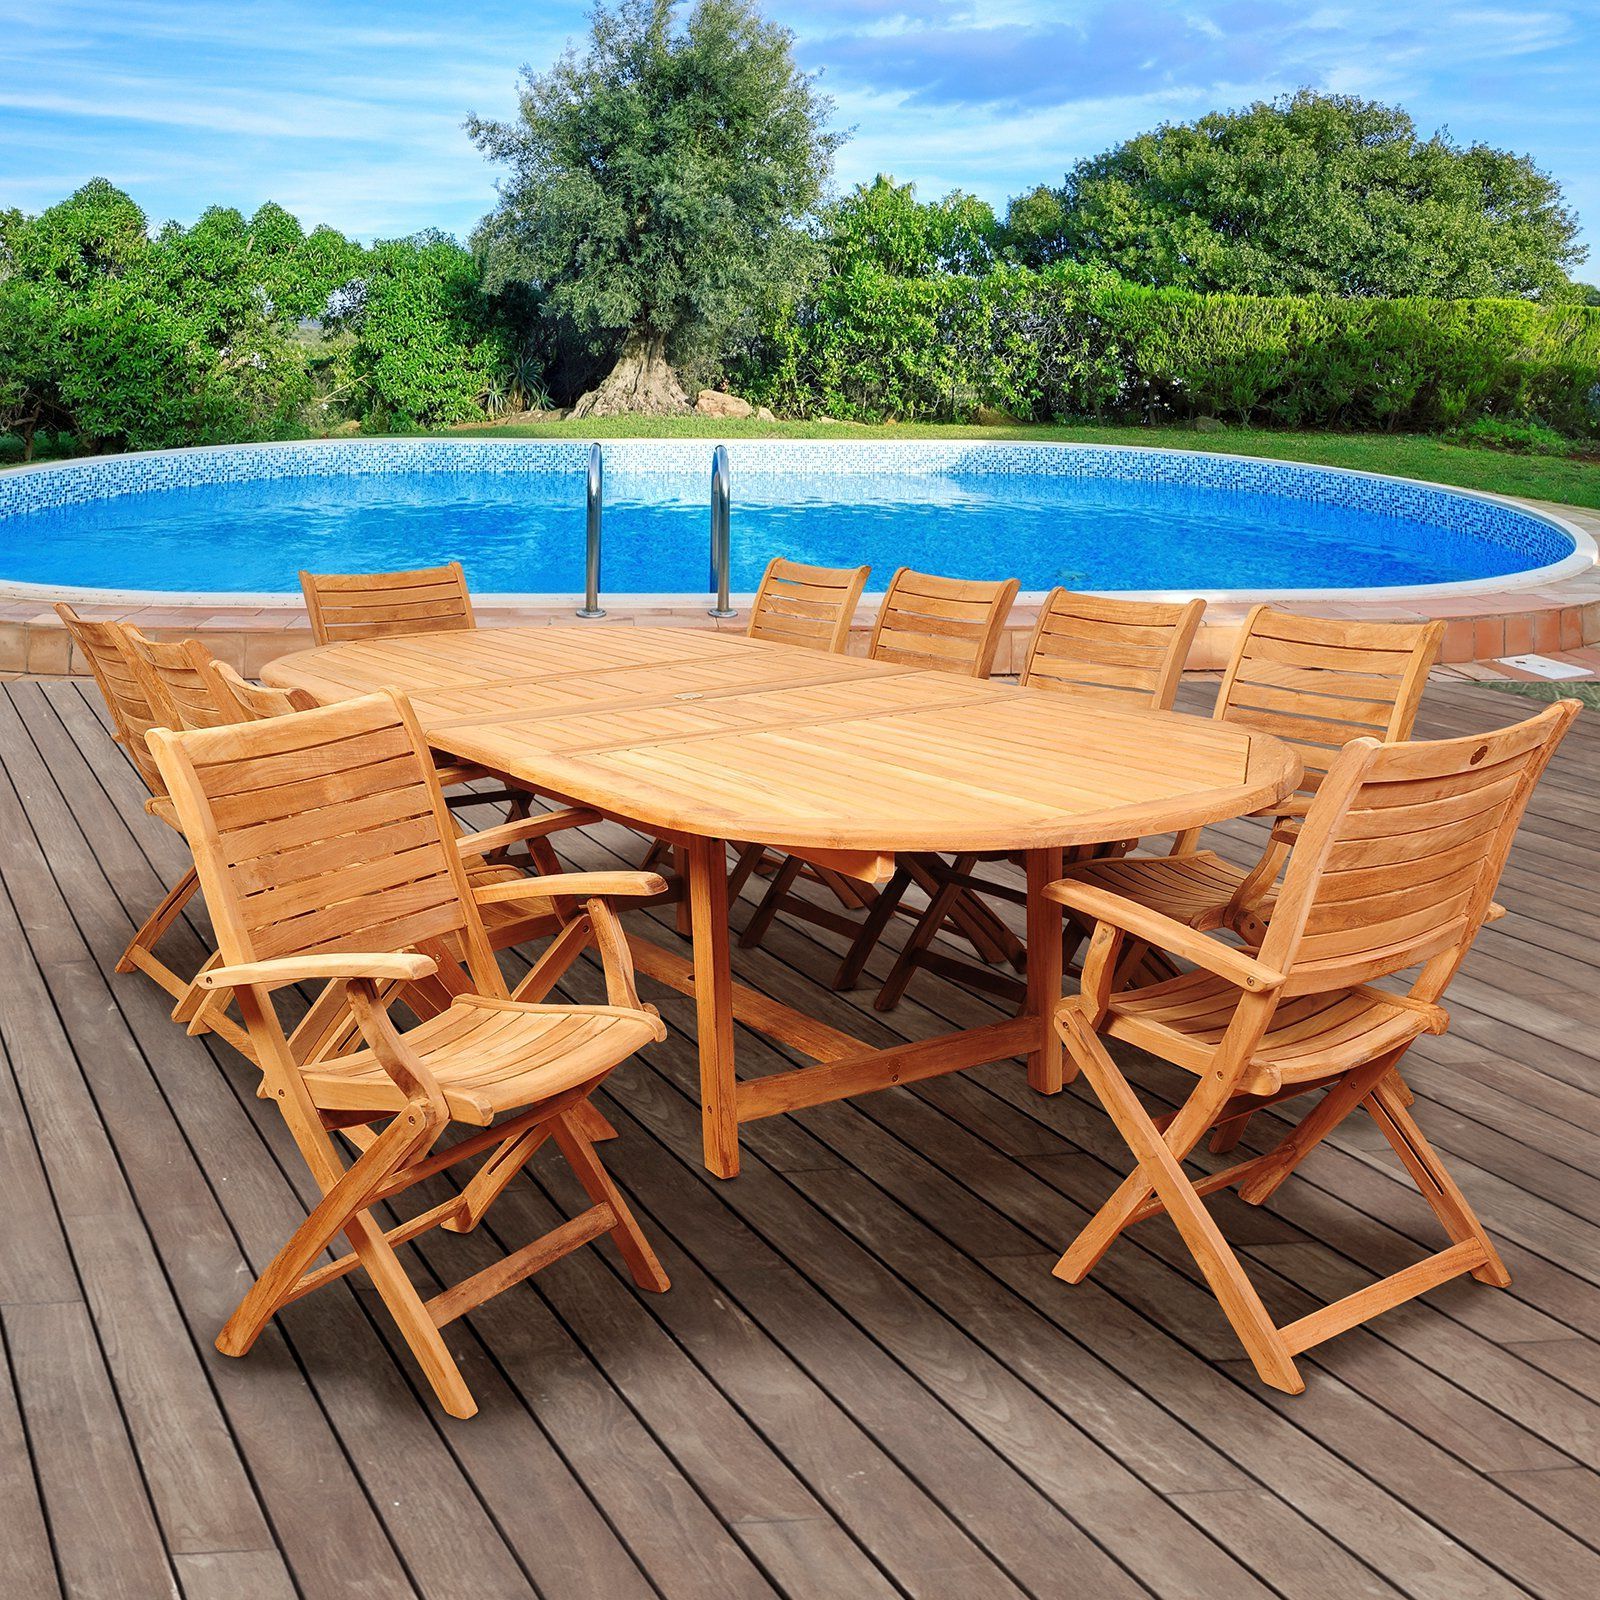 2020 11 Piece Extendable Patio Dining Sets Throughout Outdoor Amazonia Pike 11 Piece Double Extendable Dining Set (View 6 of 15)